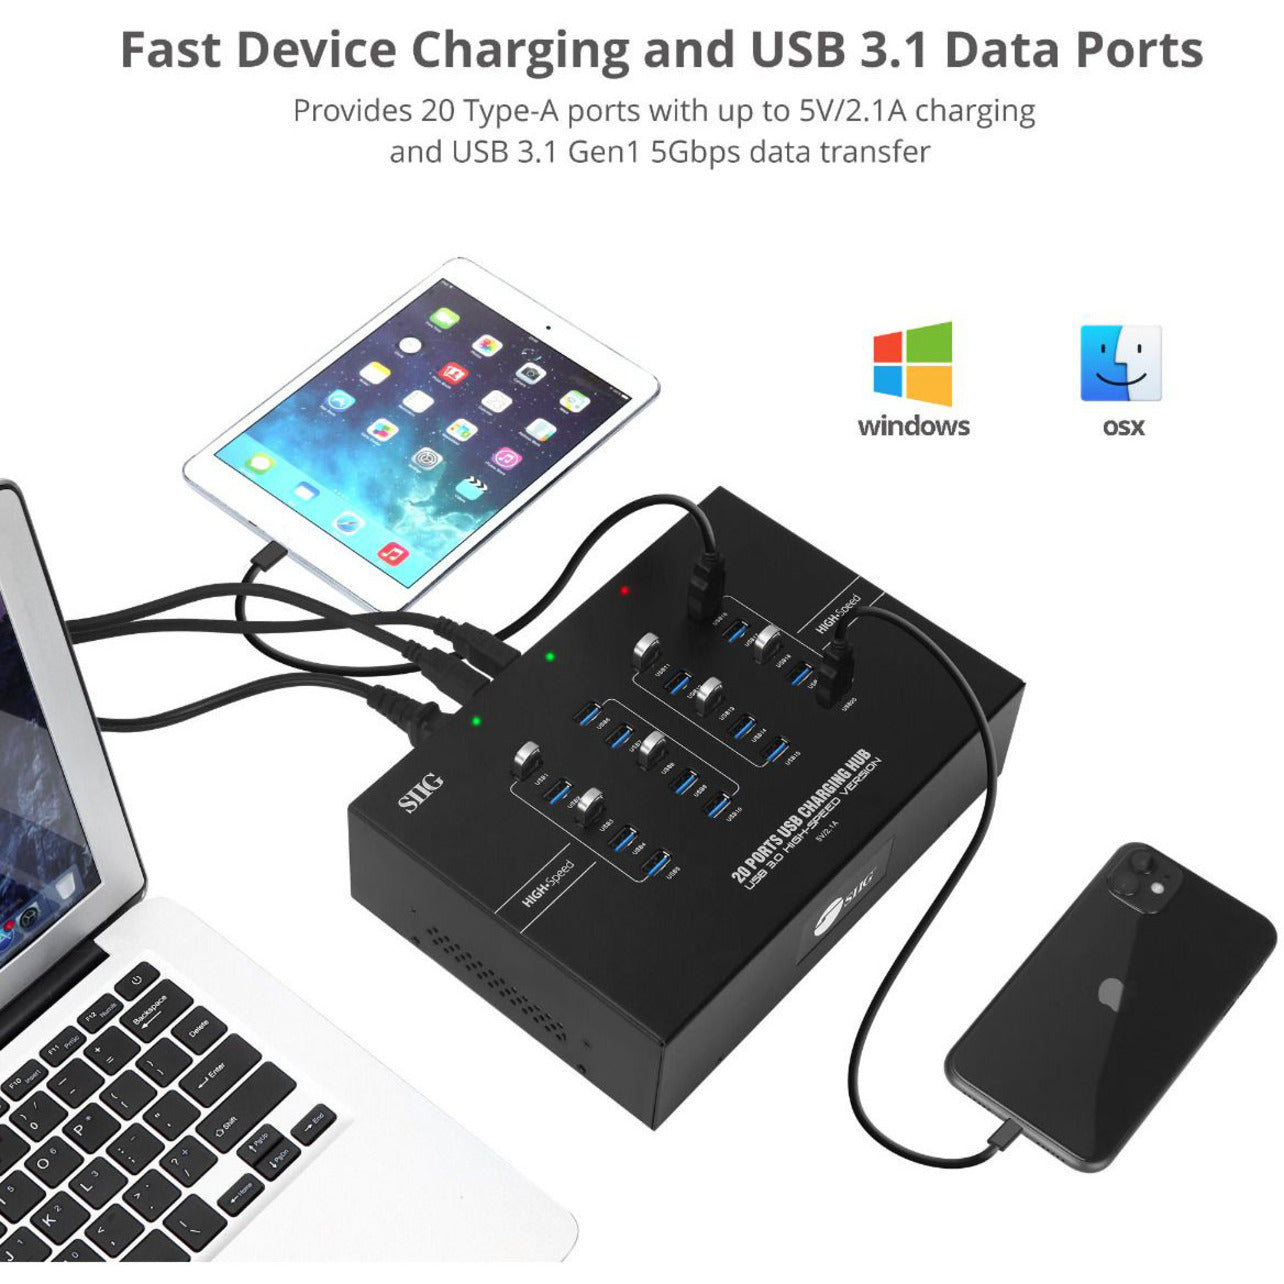 SIIG ID-US0611-S1 20-Port Industrial USB 3.0 Hub with Charging, High-Speed Data Transfer and Charging for Multiple Devices